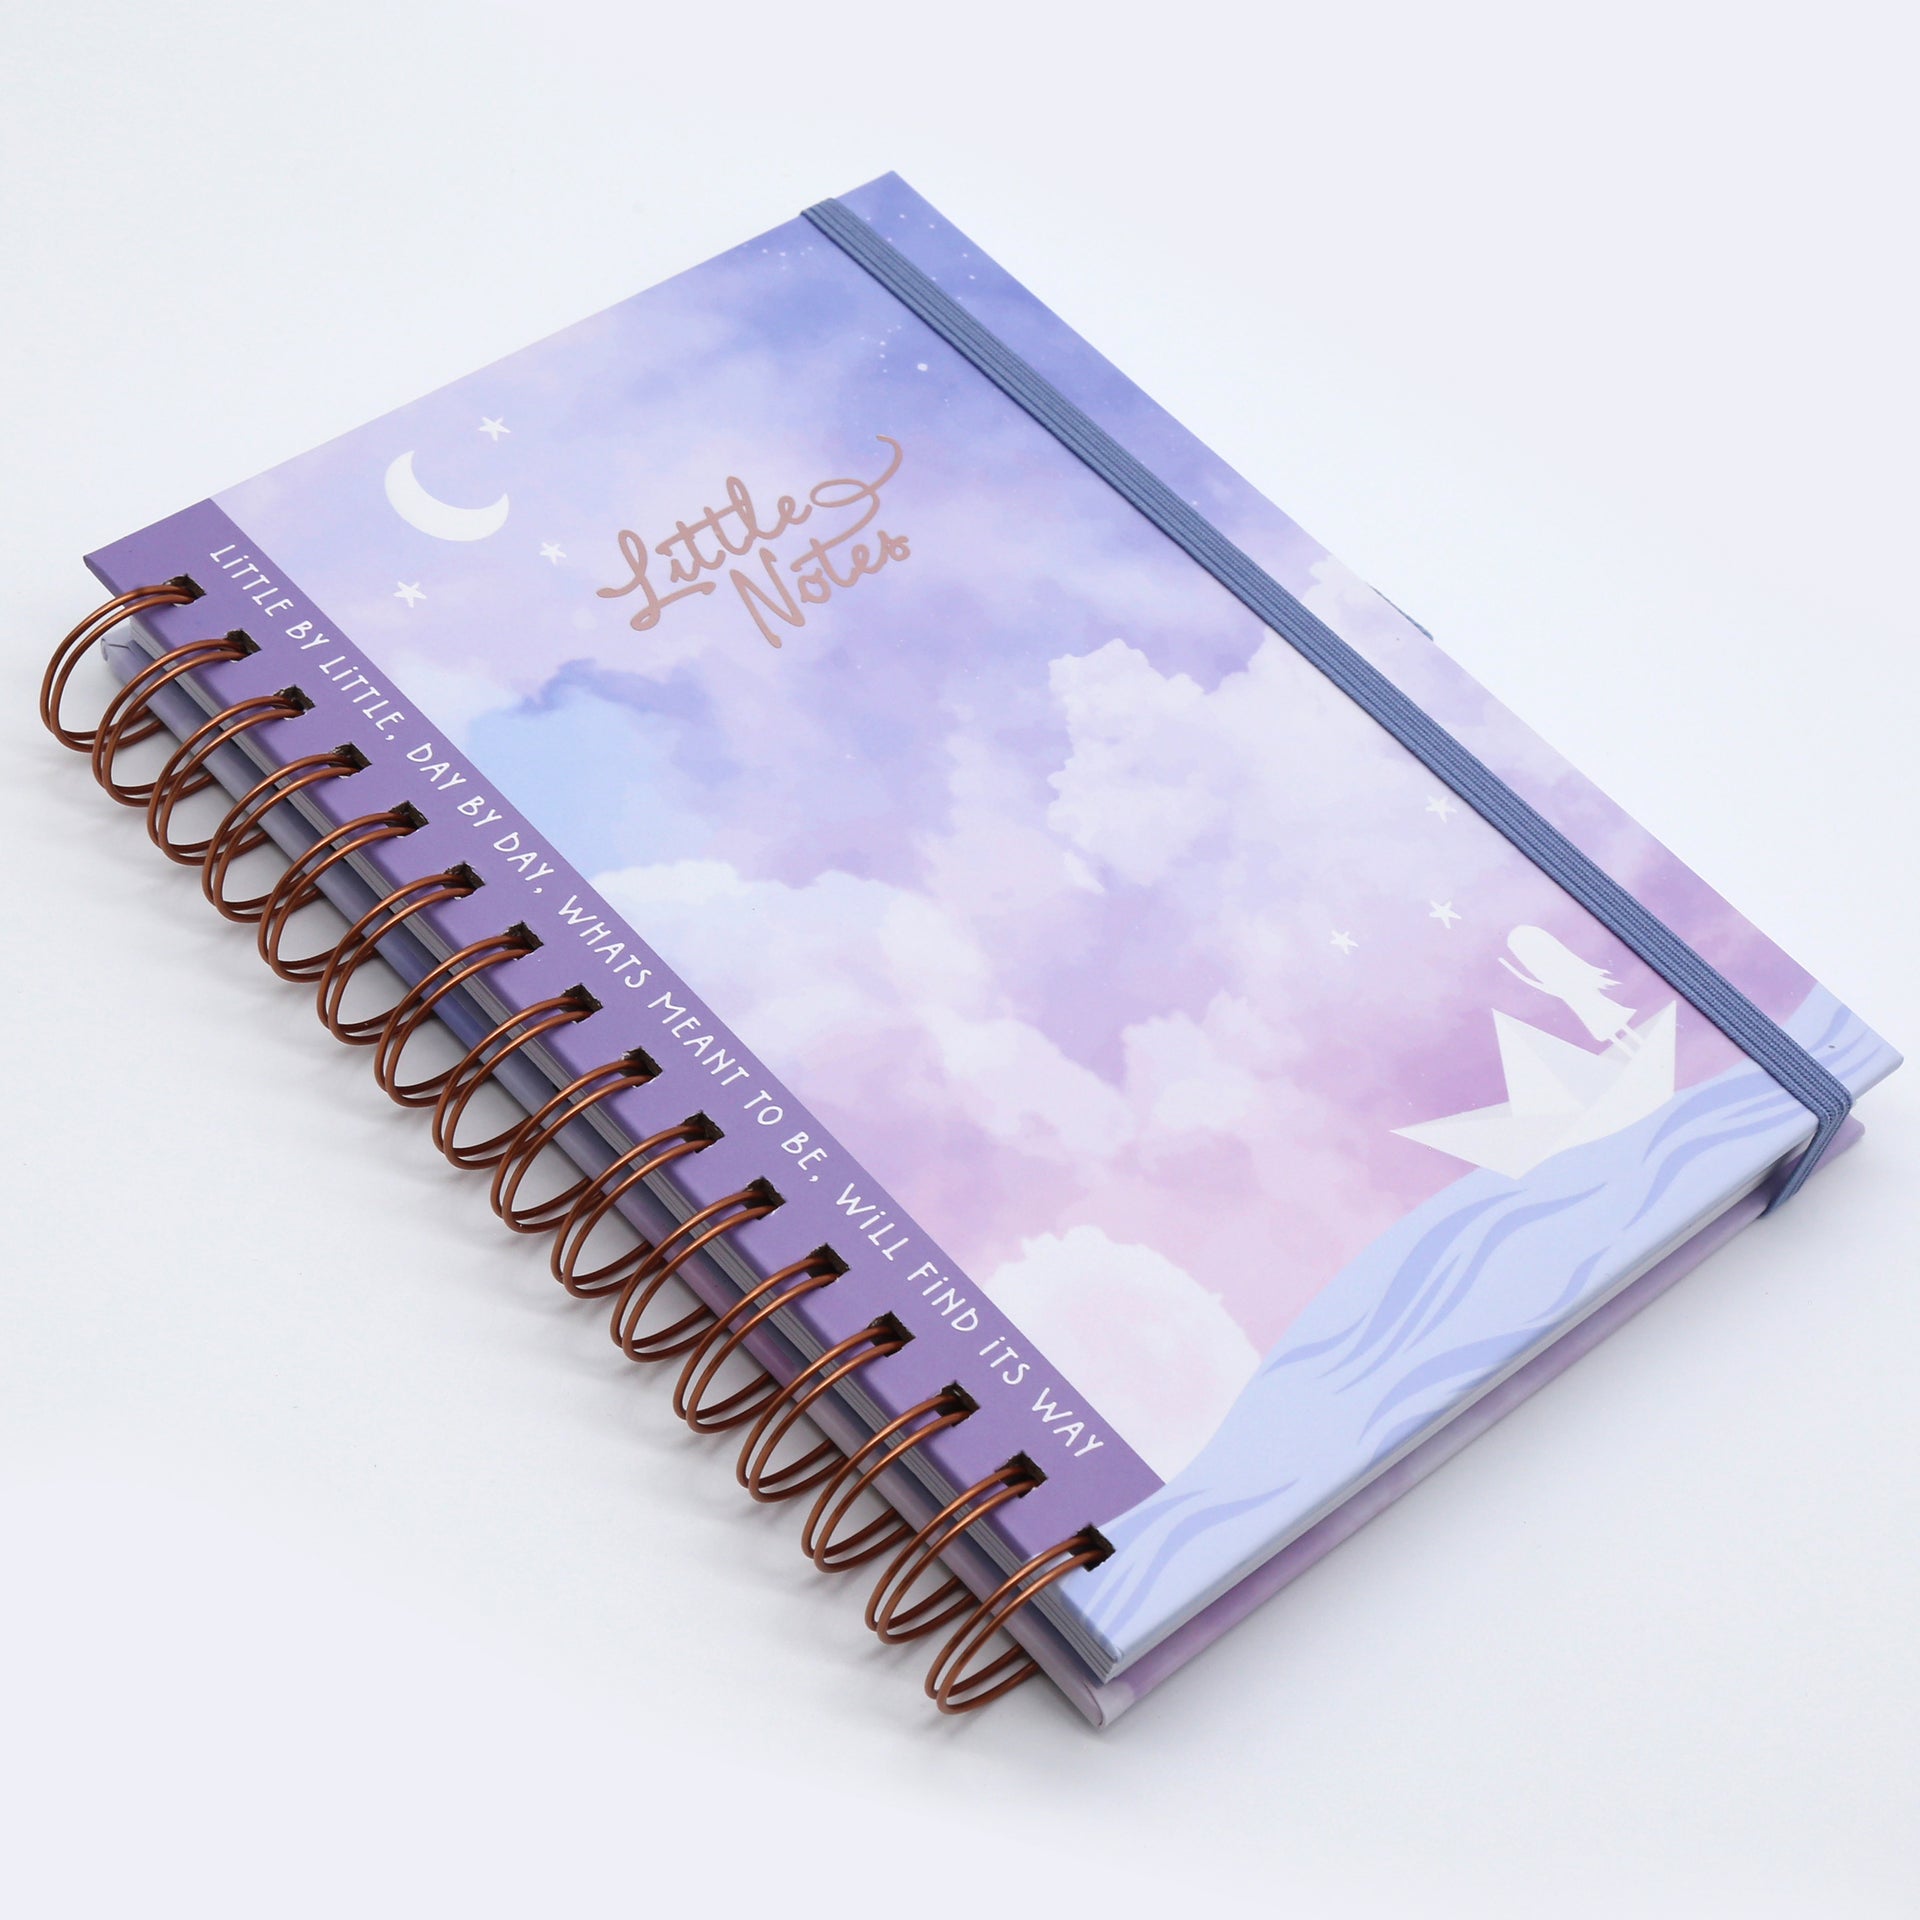 Little Birdie Journaling Note Book Premium Quality A5 1/Pkg Ruled